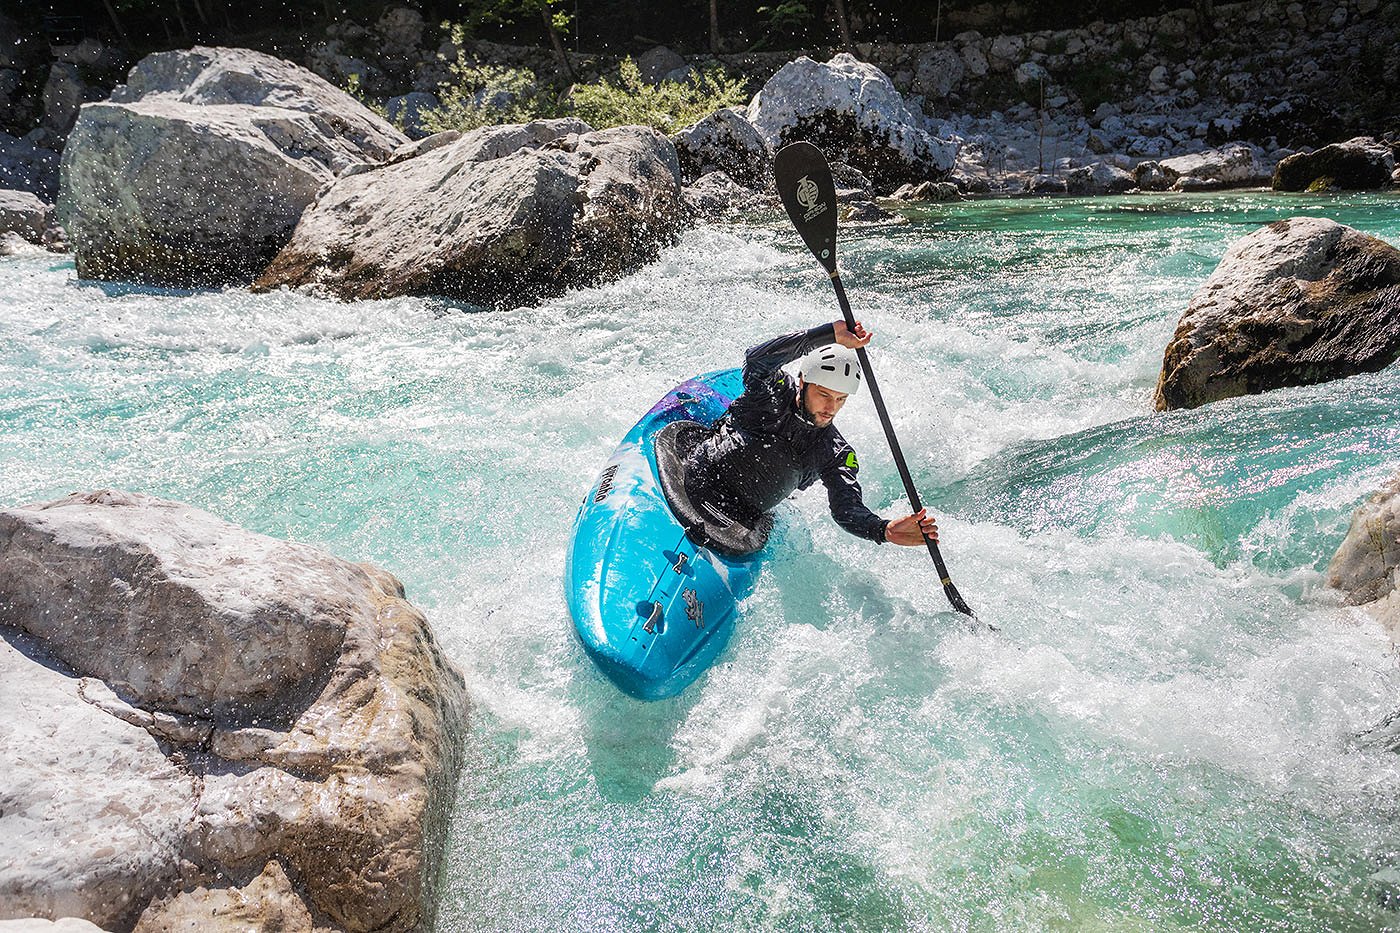 The kayaker turns into a counter-current on the emerald river Soča